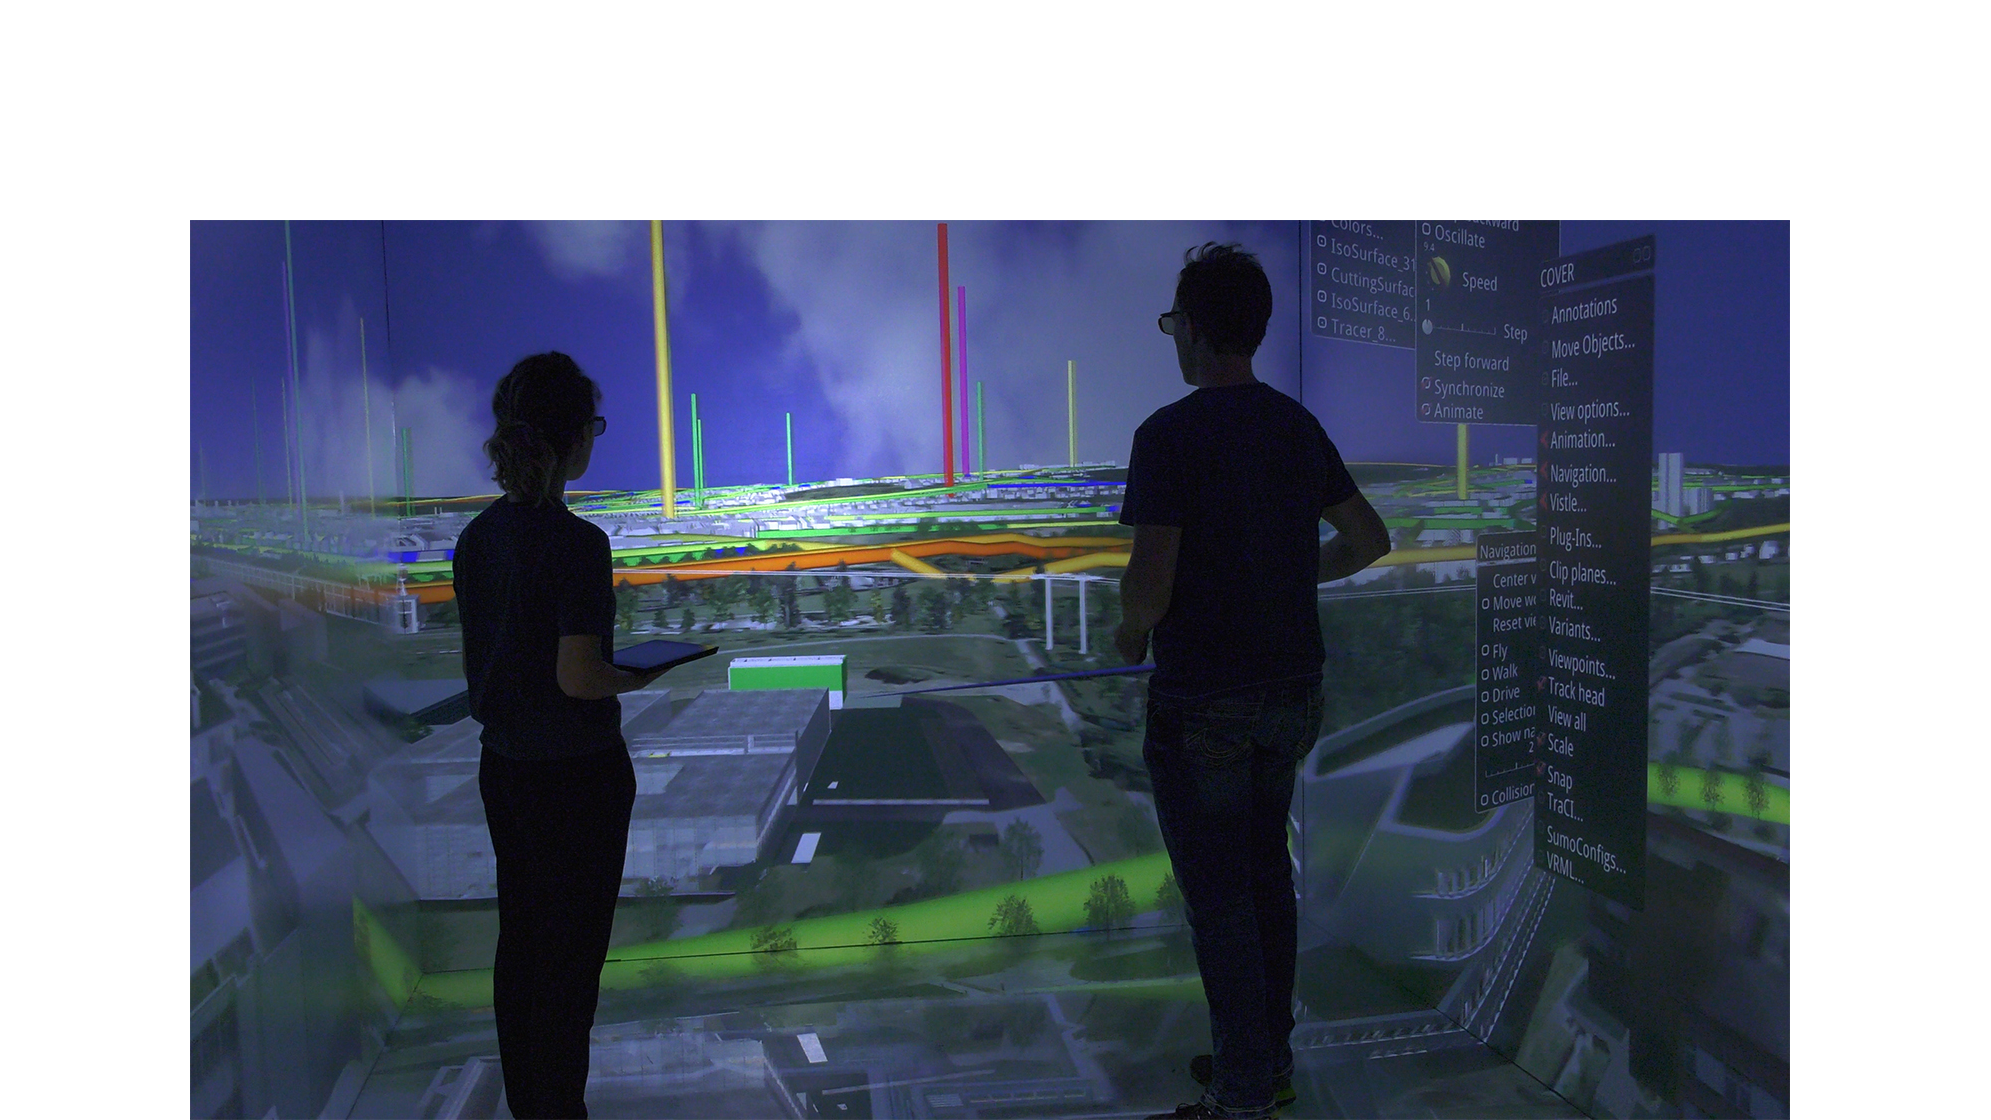 Two scientists observe a room-sized, projected visualization of the University of Stuttgart campus.